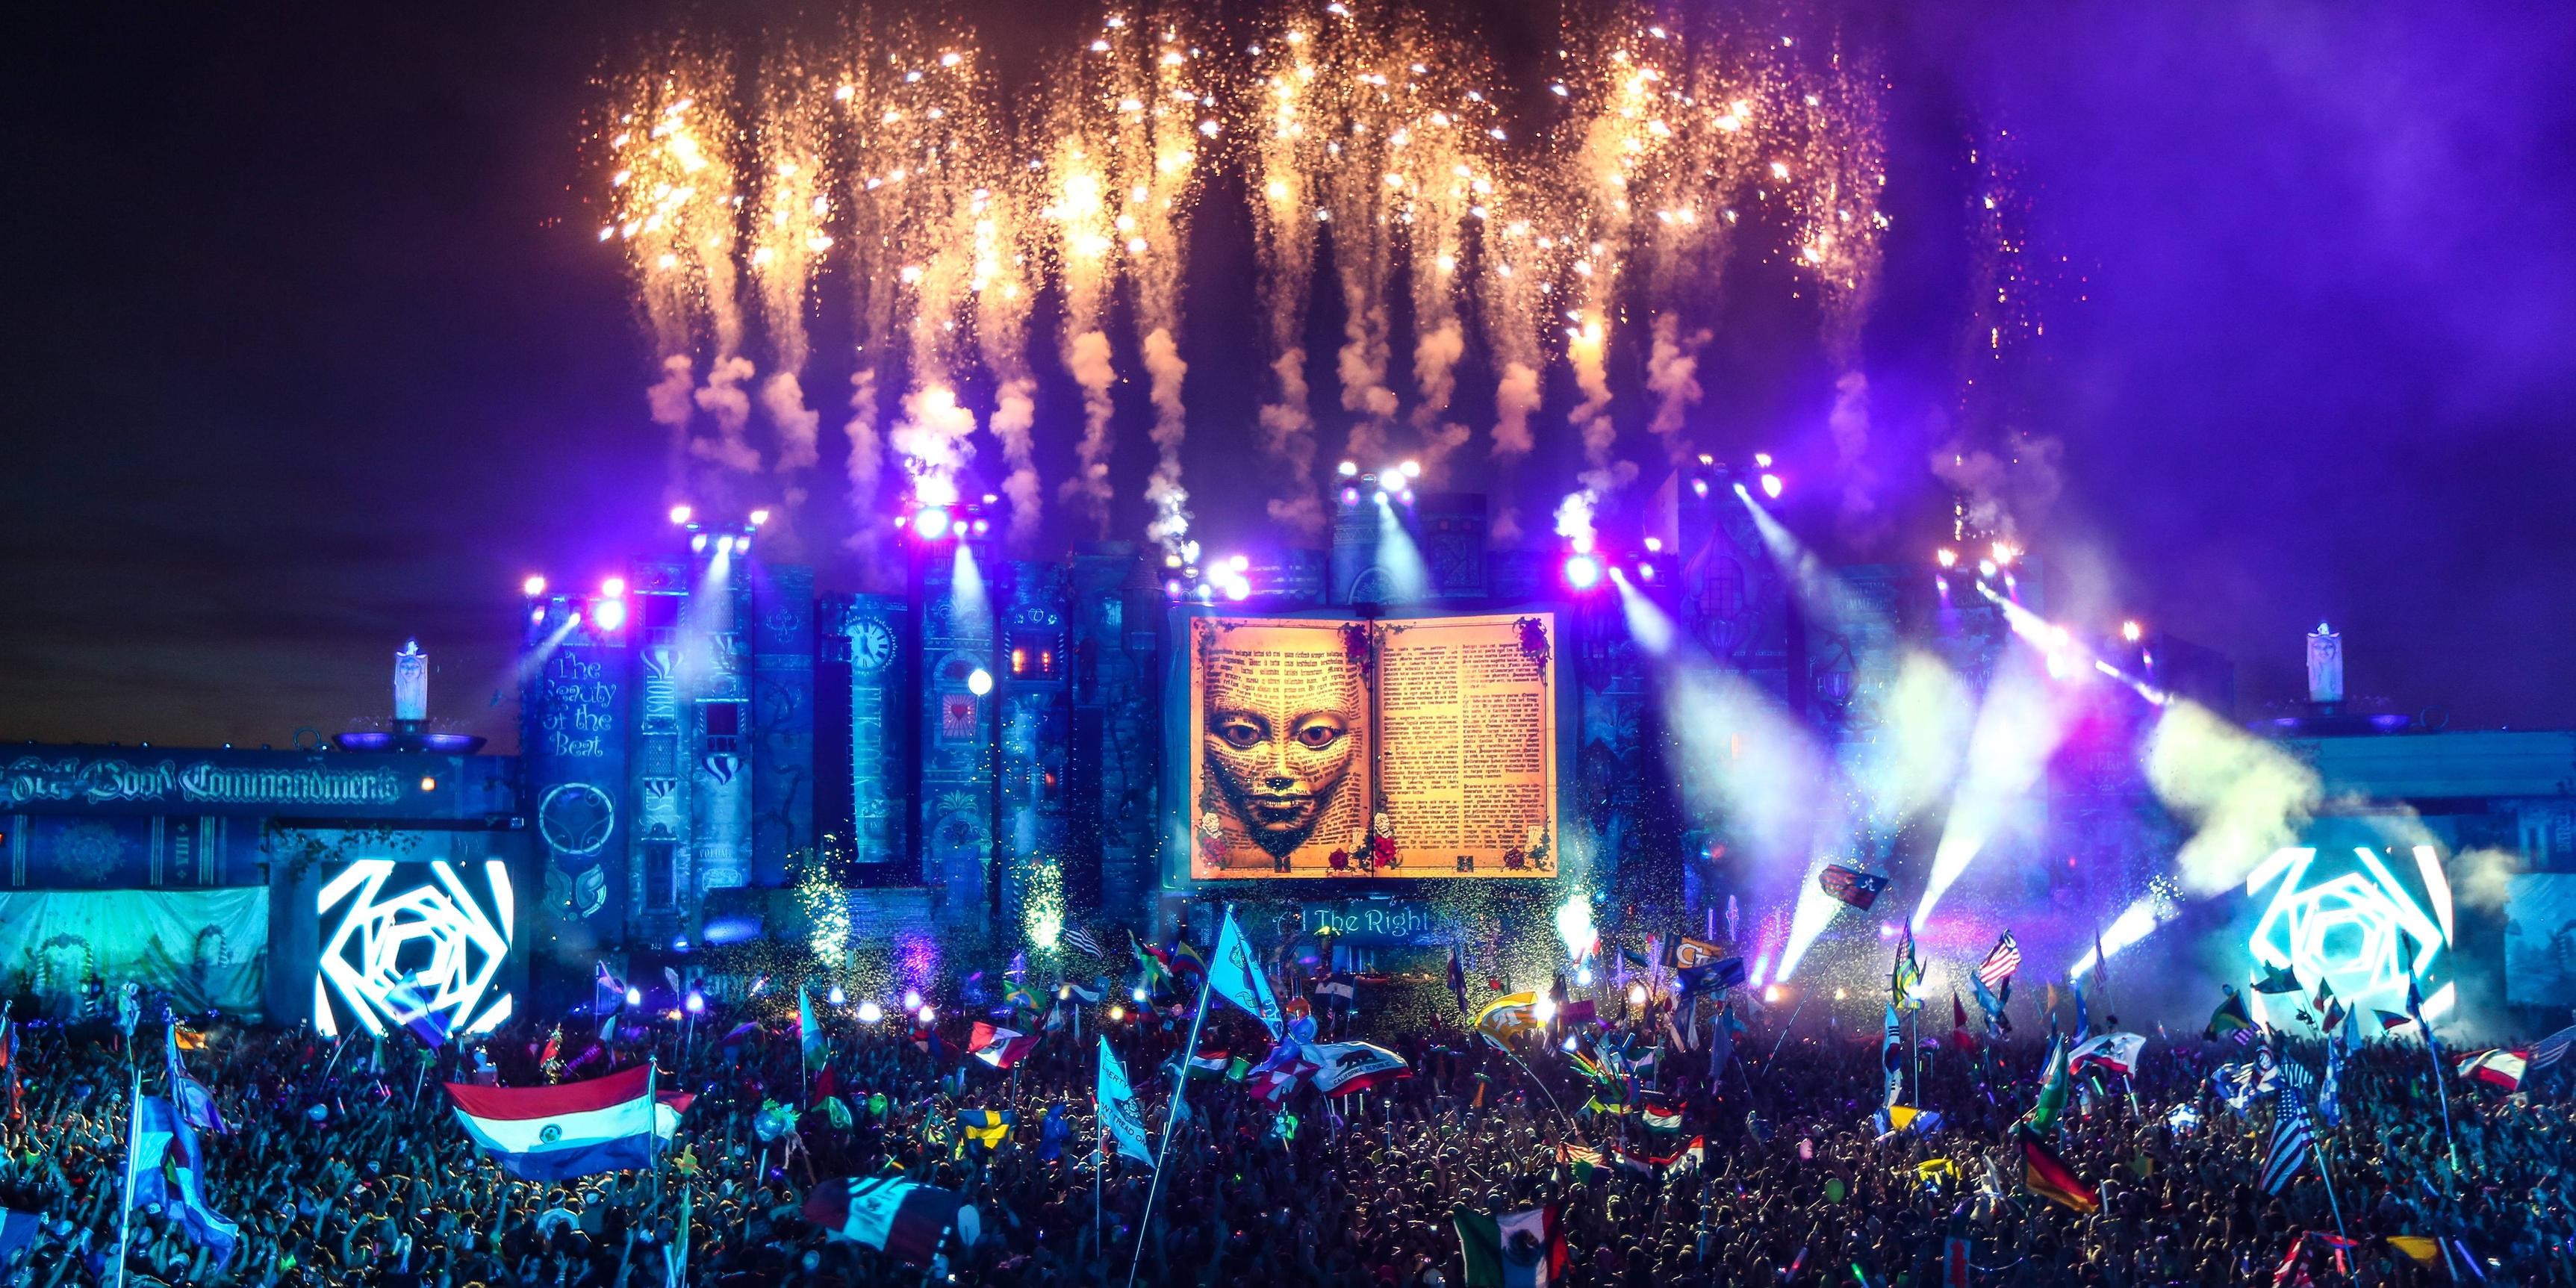 tomorrowland wallpaper,event,performance,fireworks,public event,stage